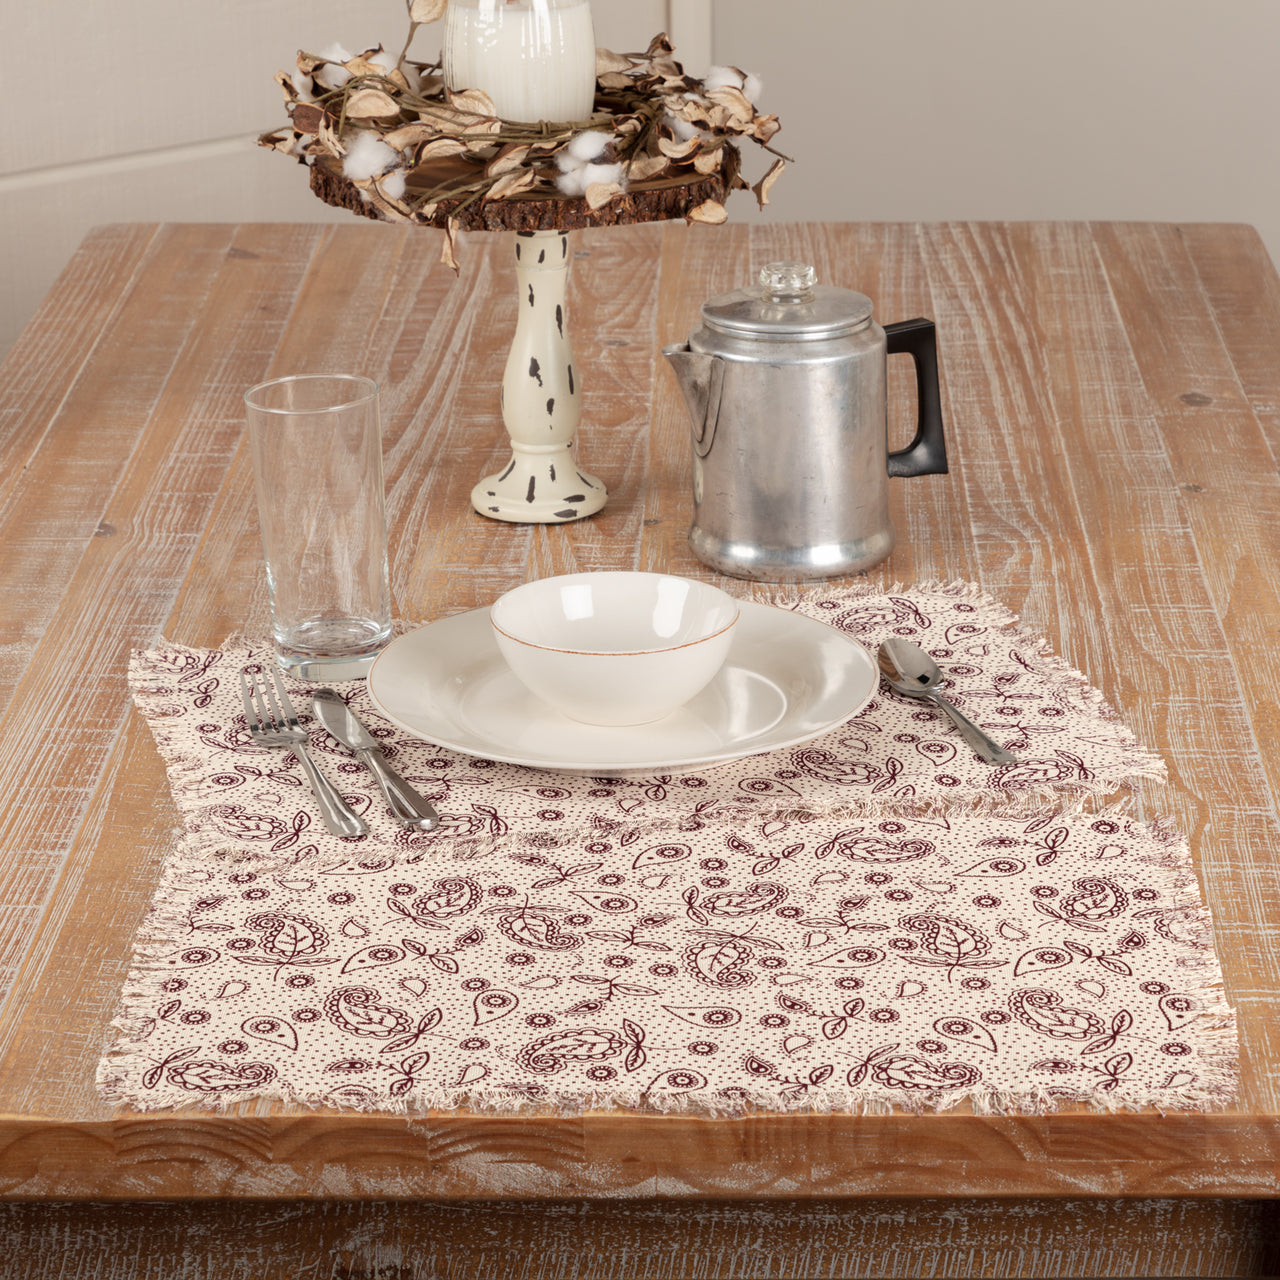 Calistoga Placemat Printed Tobaco Cloth Fringed Set 6-12x18 VHC Brands